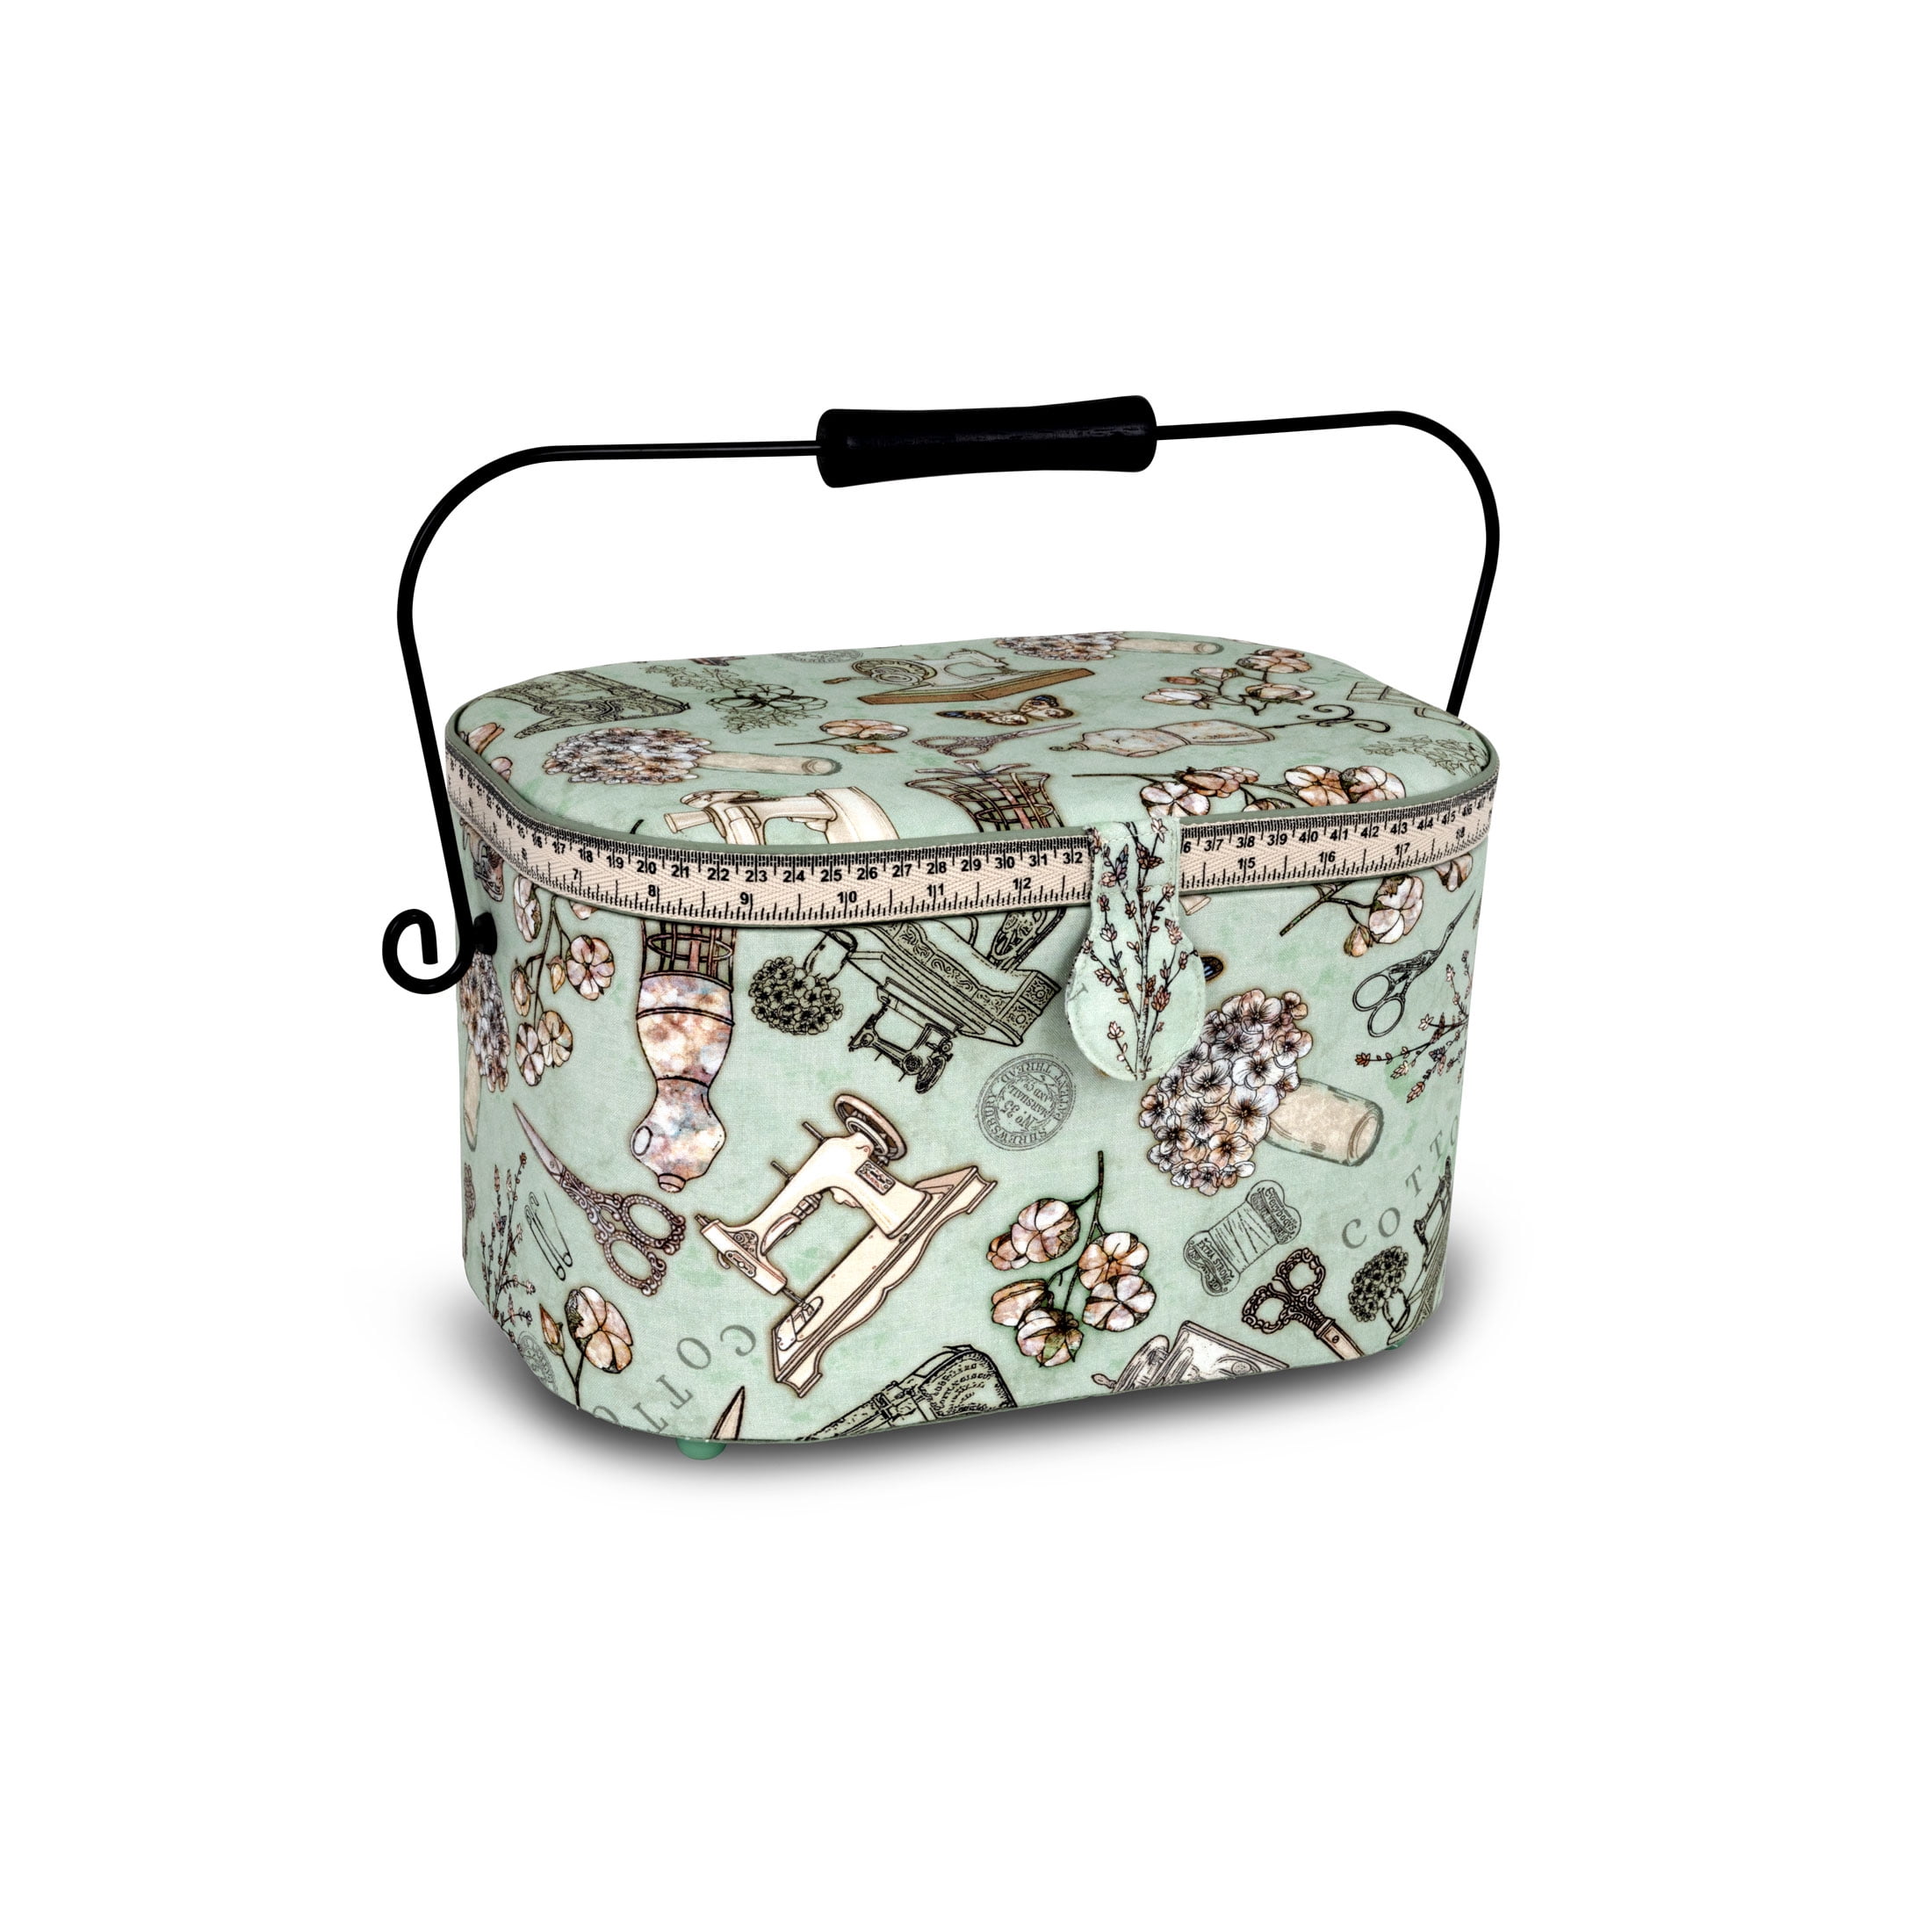 Extra Large Square 11.75 x 11.75 x 8.5, Dresses Jane Square Sewing Basket Box with Plastic Tray Organizer Dritz St 